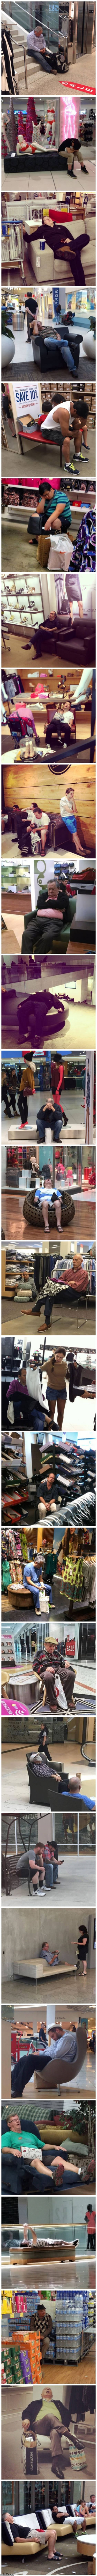 Men Trapped In Shopping Hell